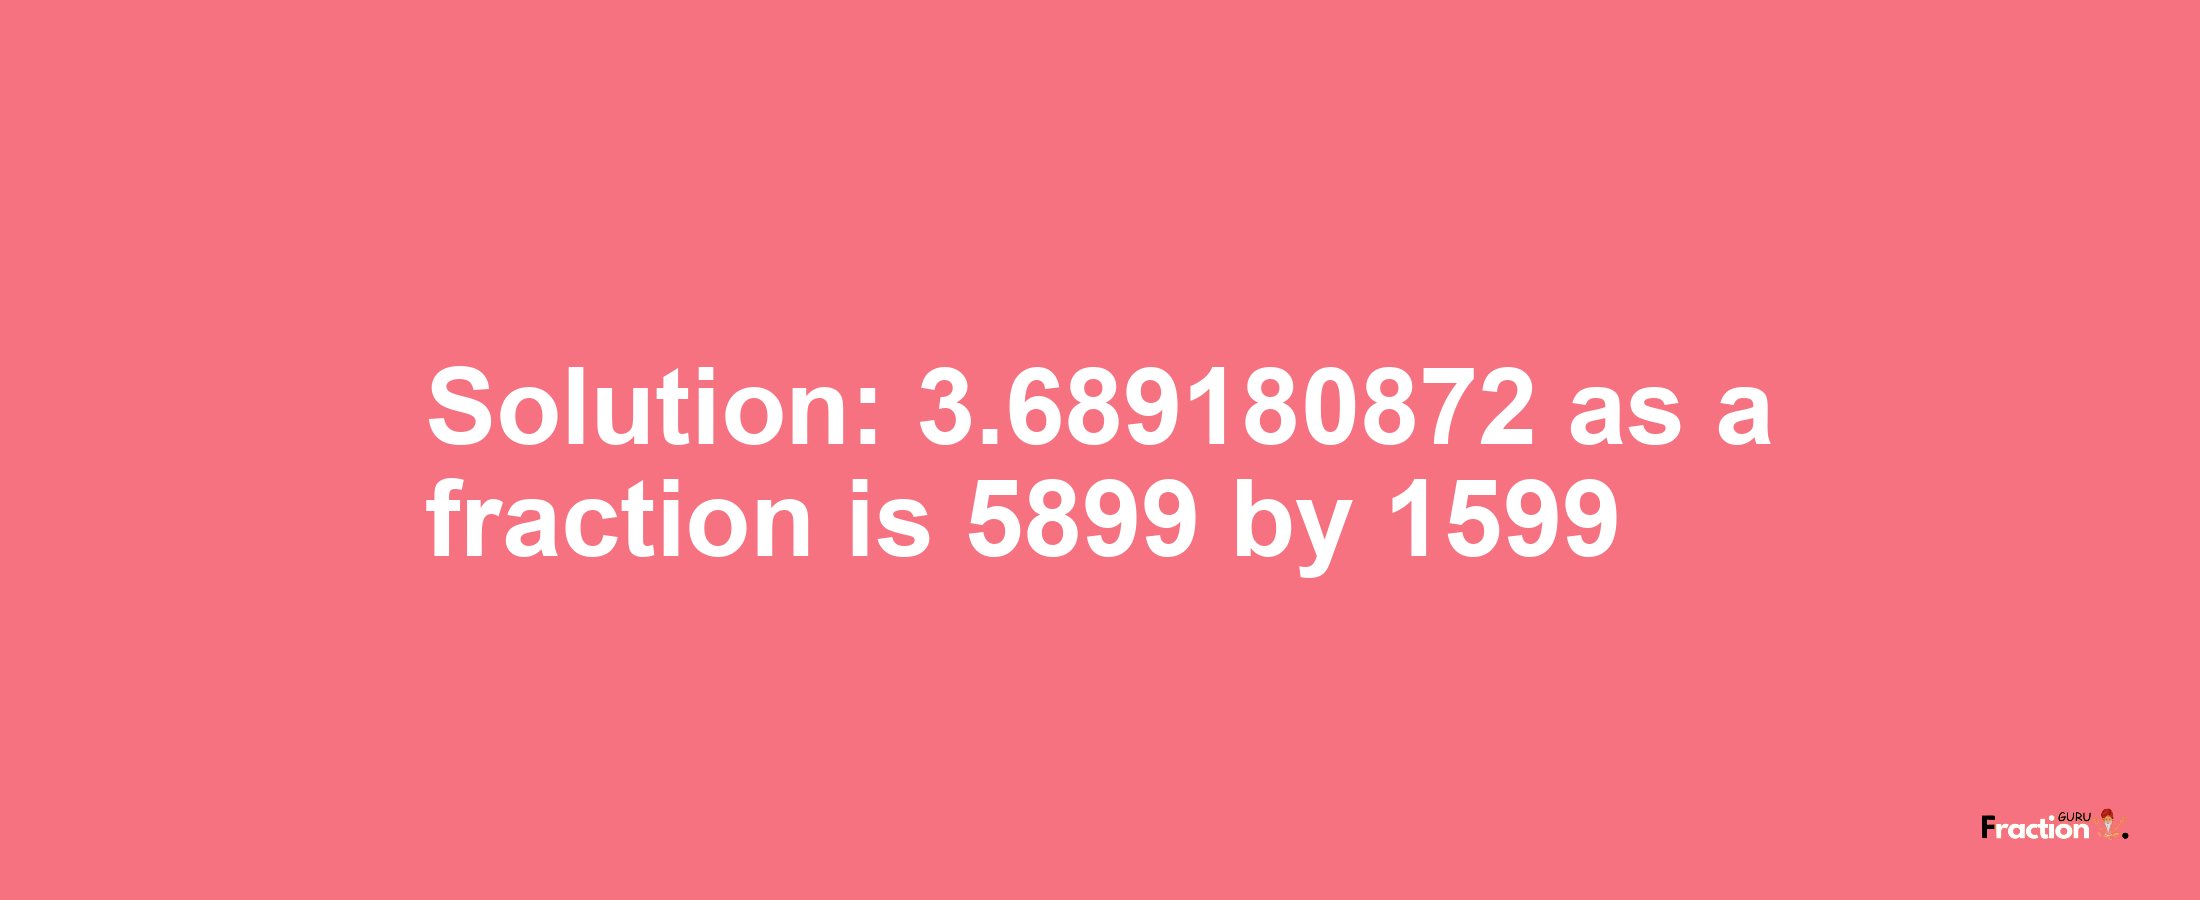 Solution:3.689180872 as a fraction is 5899/1599